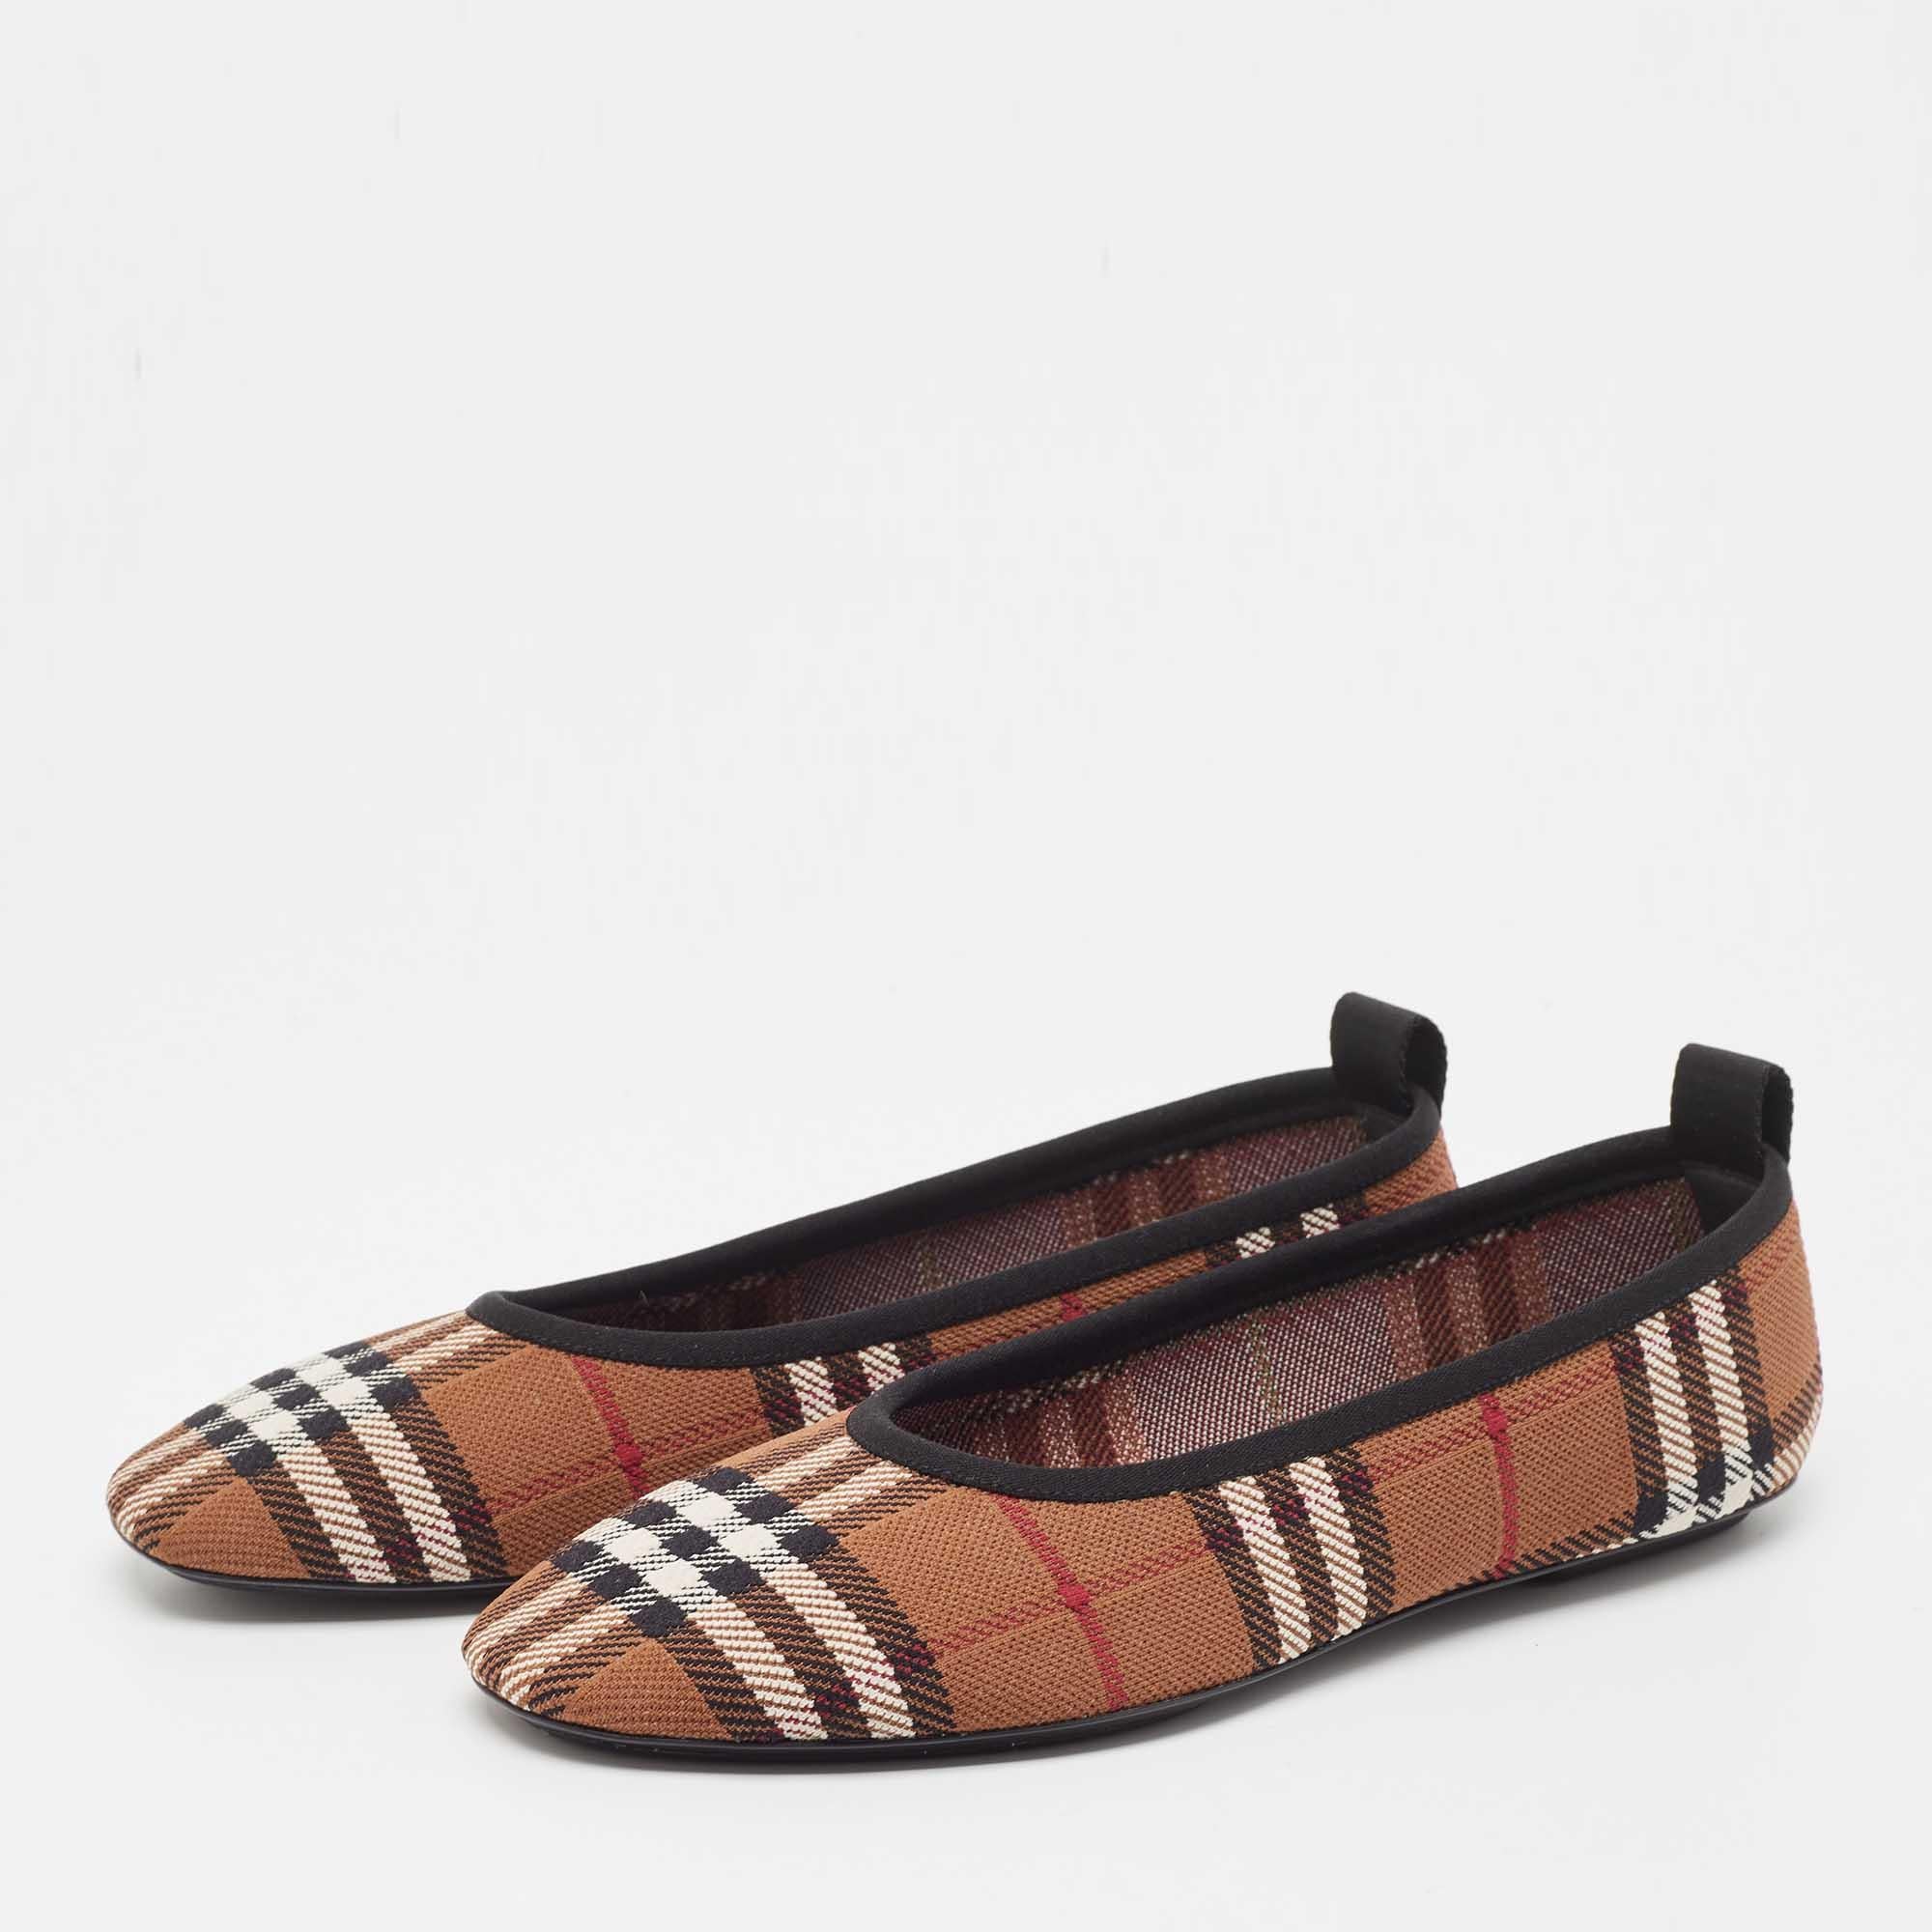 Complete your look by adding these Burberry ballet flats to your lovely wardrobe. They are crafted skilfully to grant the perfect fit and style.

